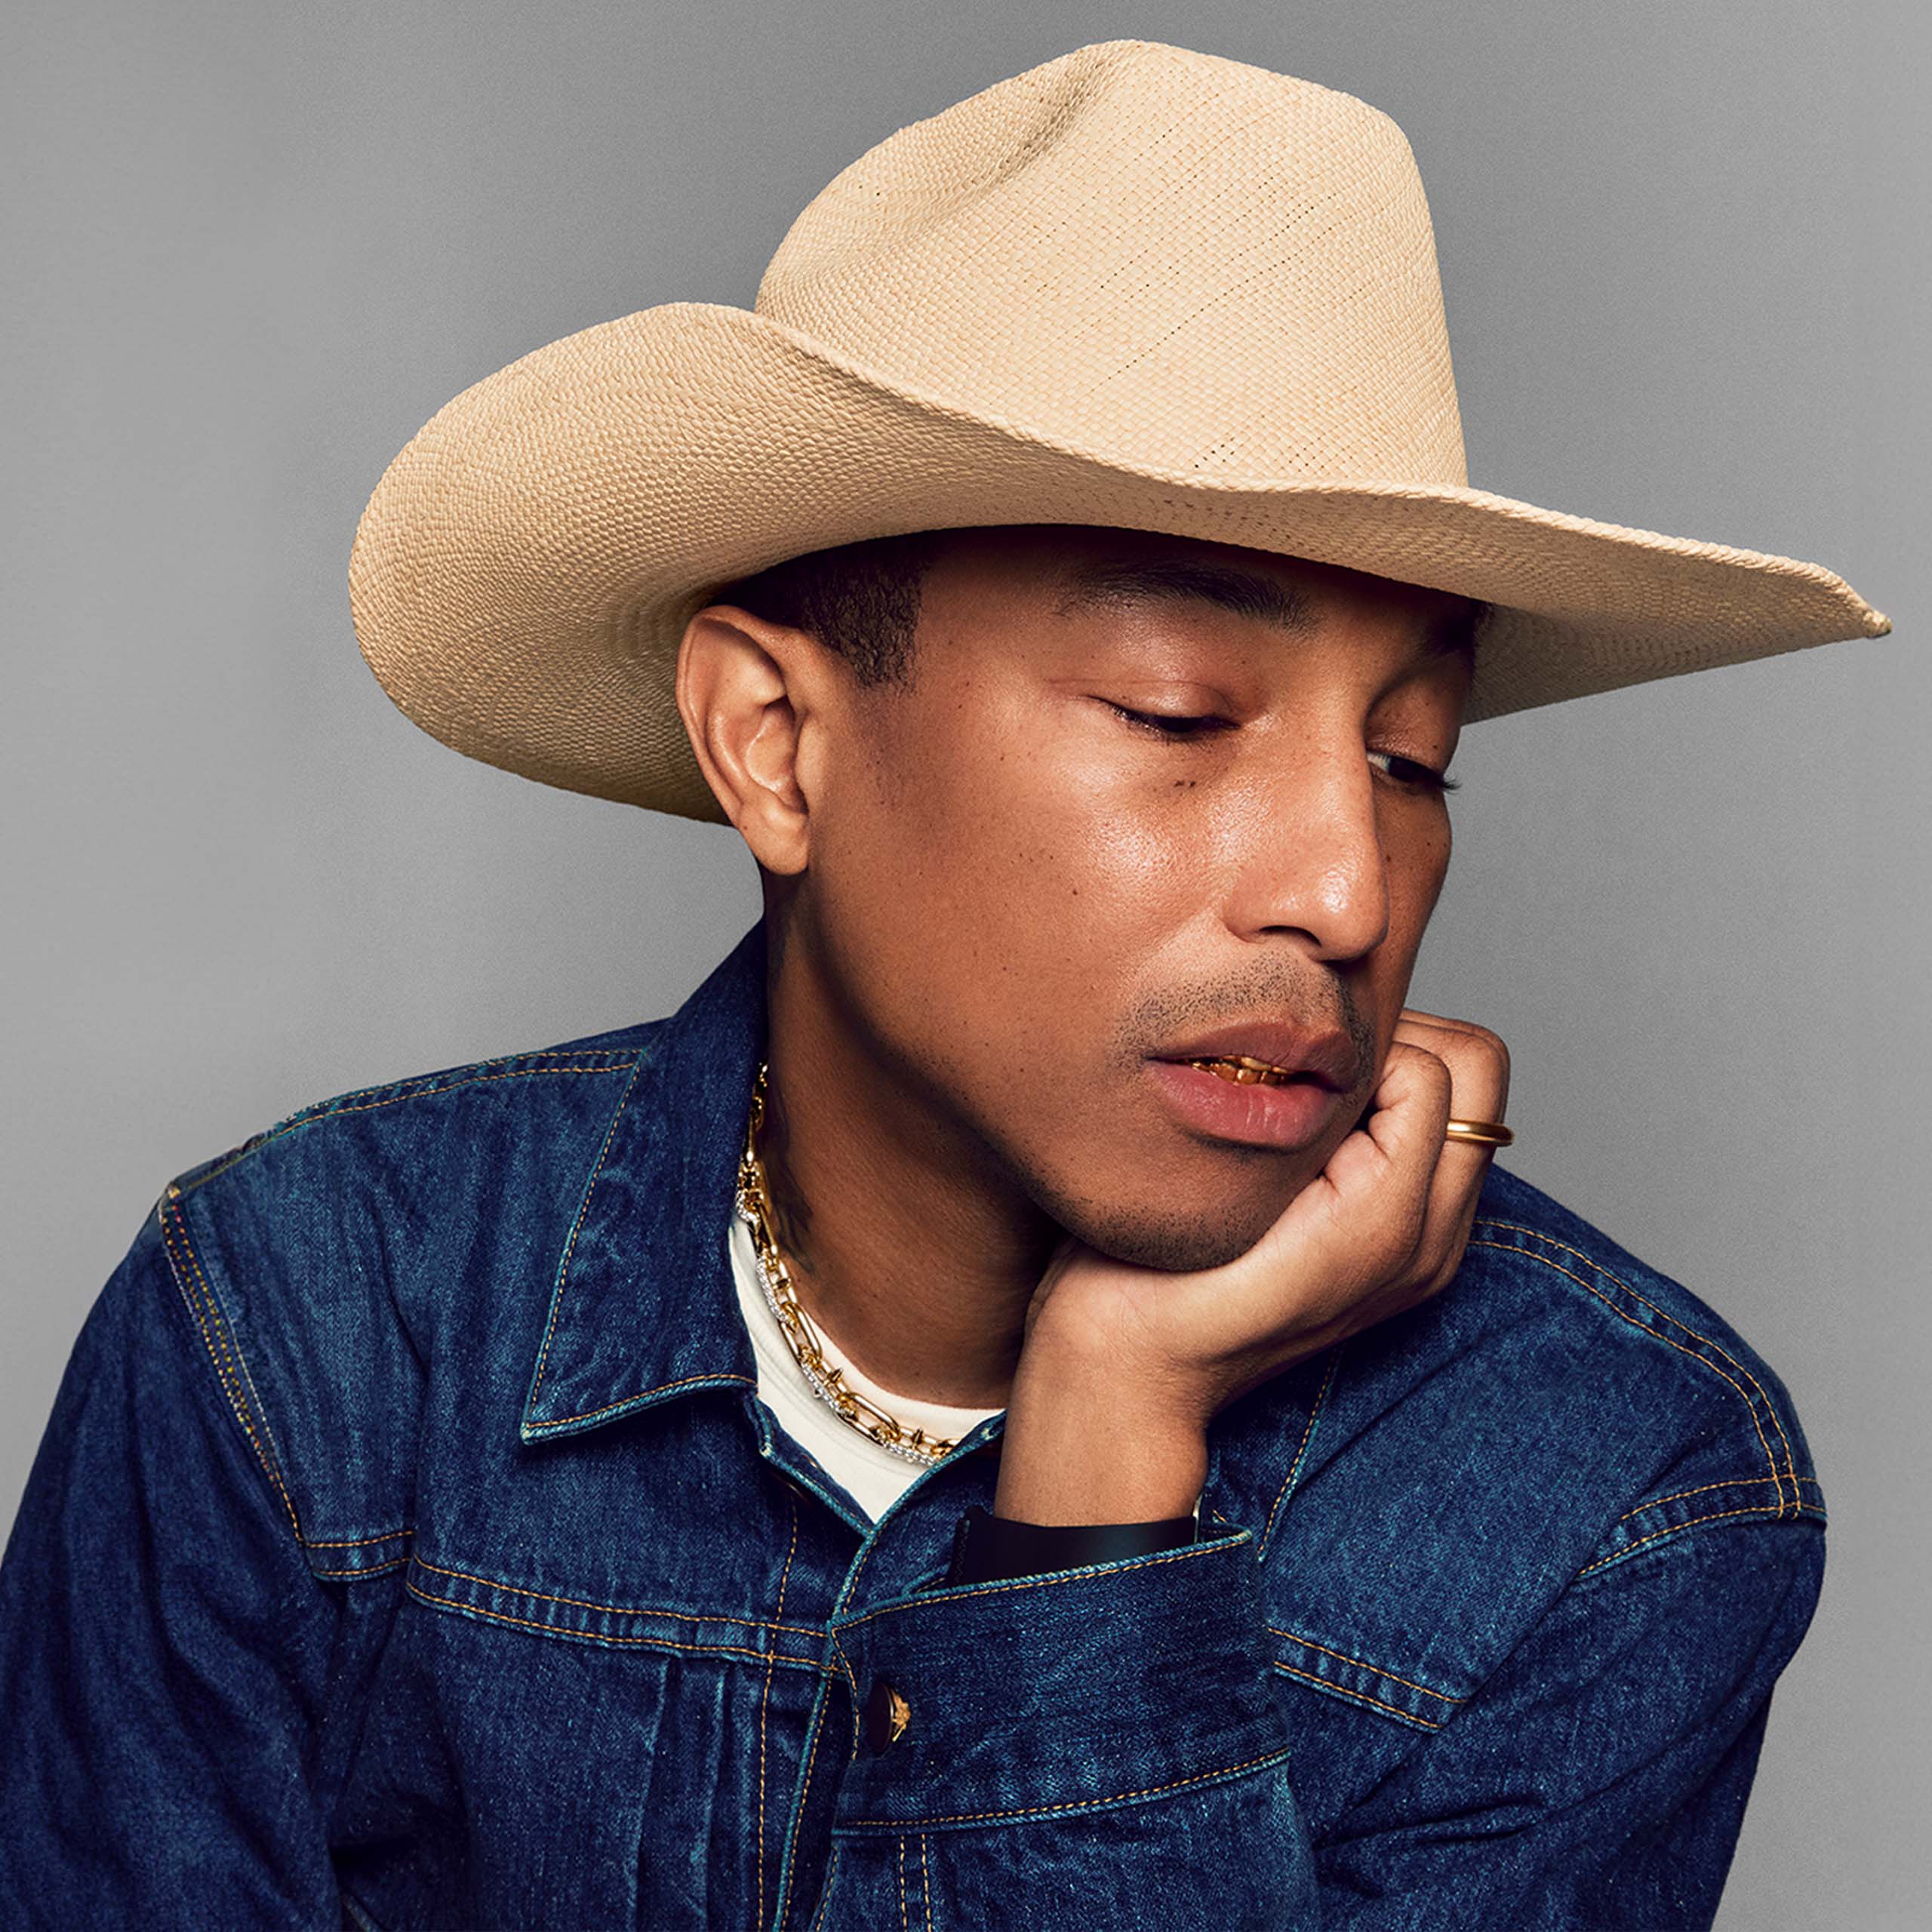 Tiffany & Co. and Pharrell Williams Celebrate the Beauty of Blackness in Debut Collection